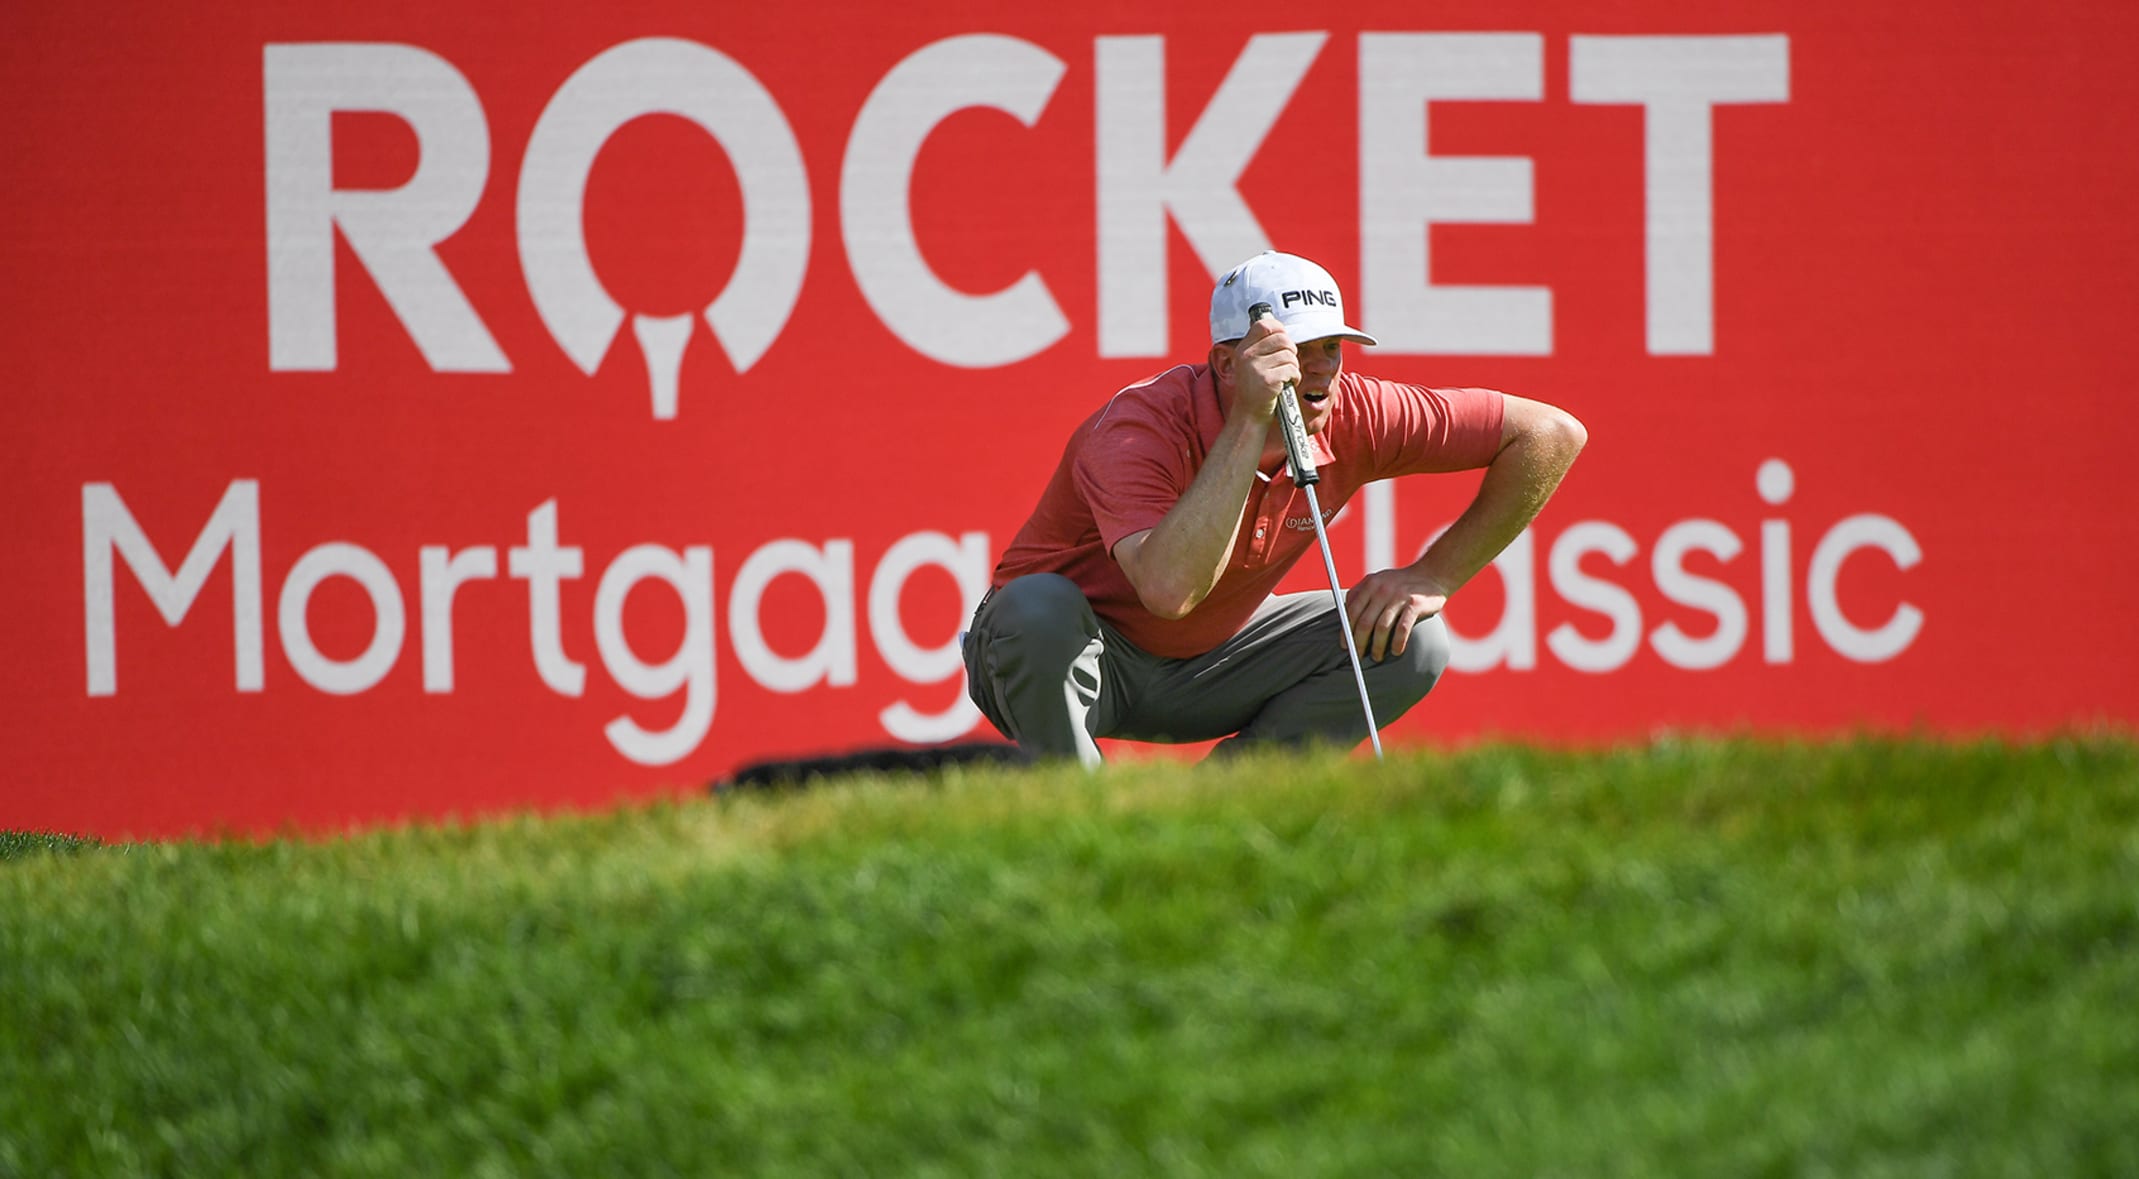 PGA Rocket Mortgage Classic – Tournament Preview: July 2020